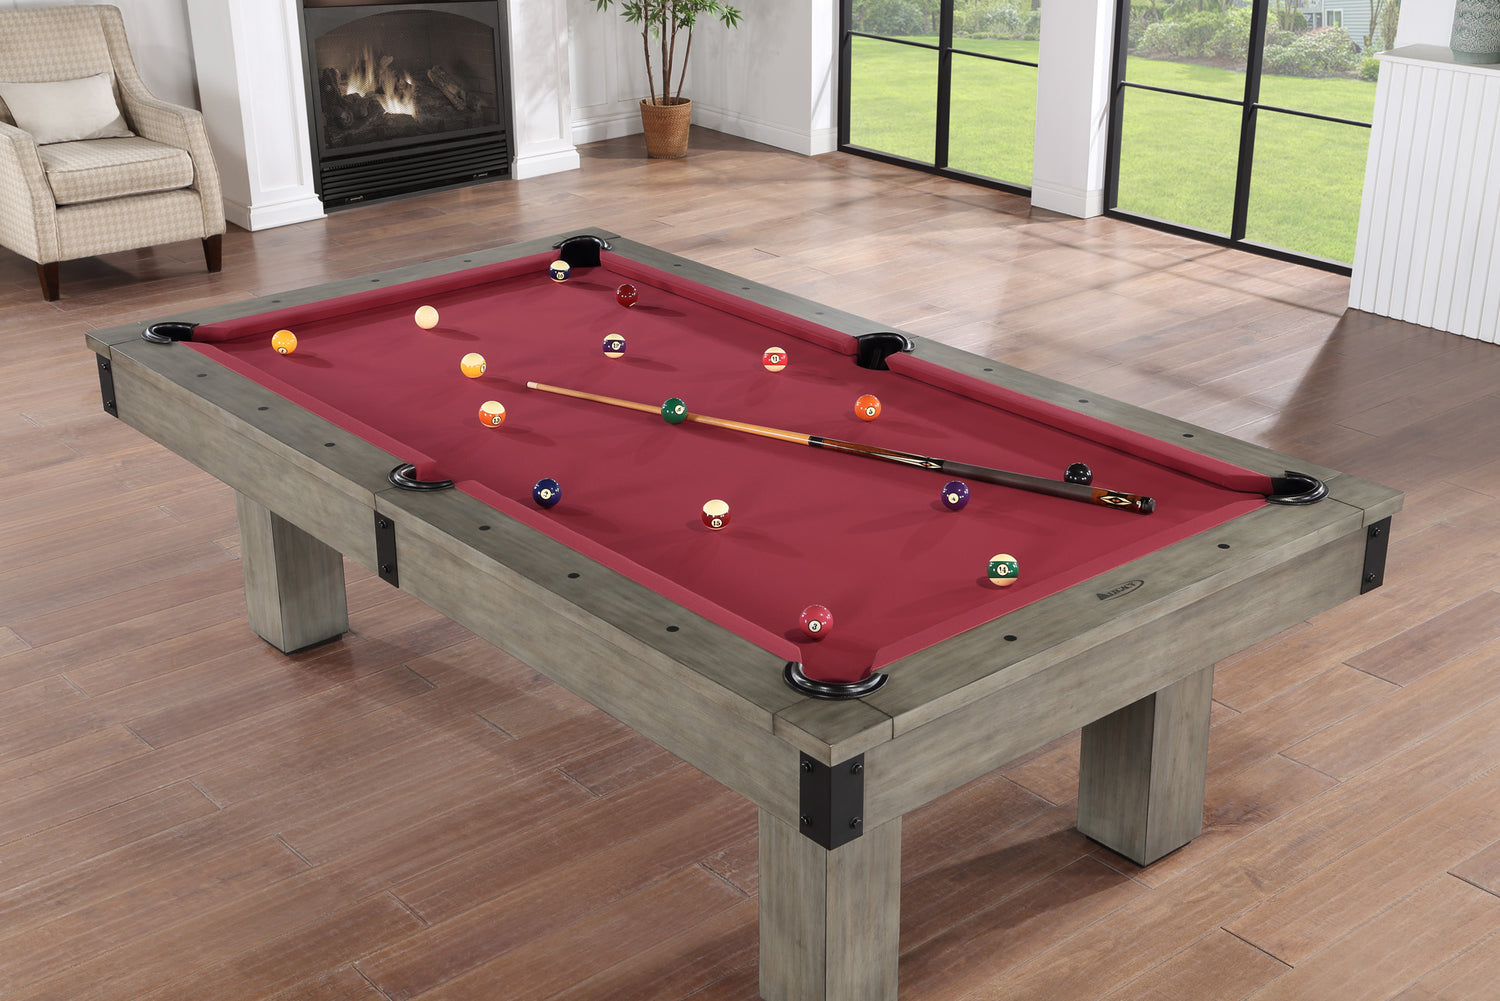 Legacy Billiards Colt II Pool Table in Overcast Finish with Legacy Red Cloth Modern Room Scene - Angle View From Above